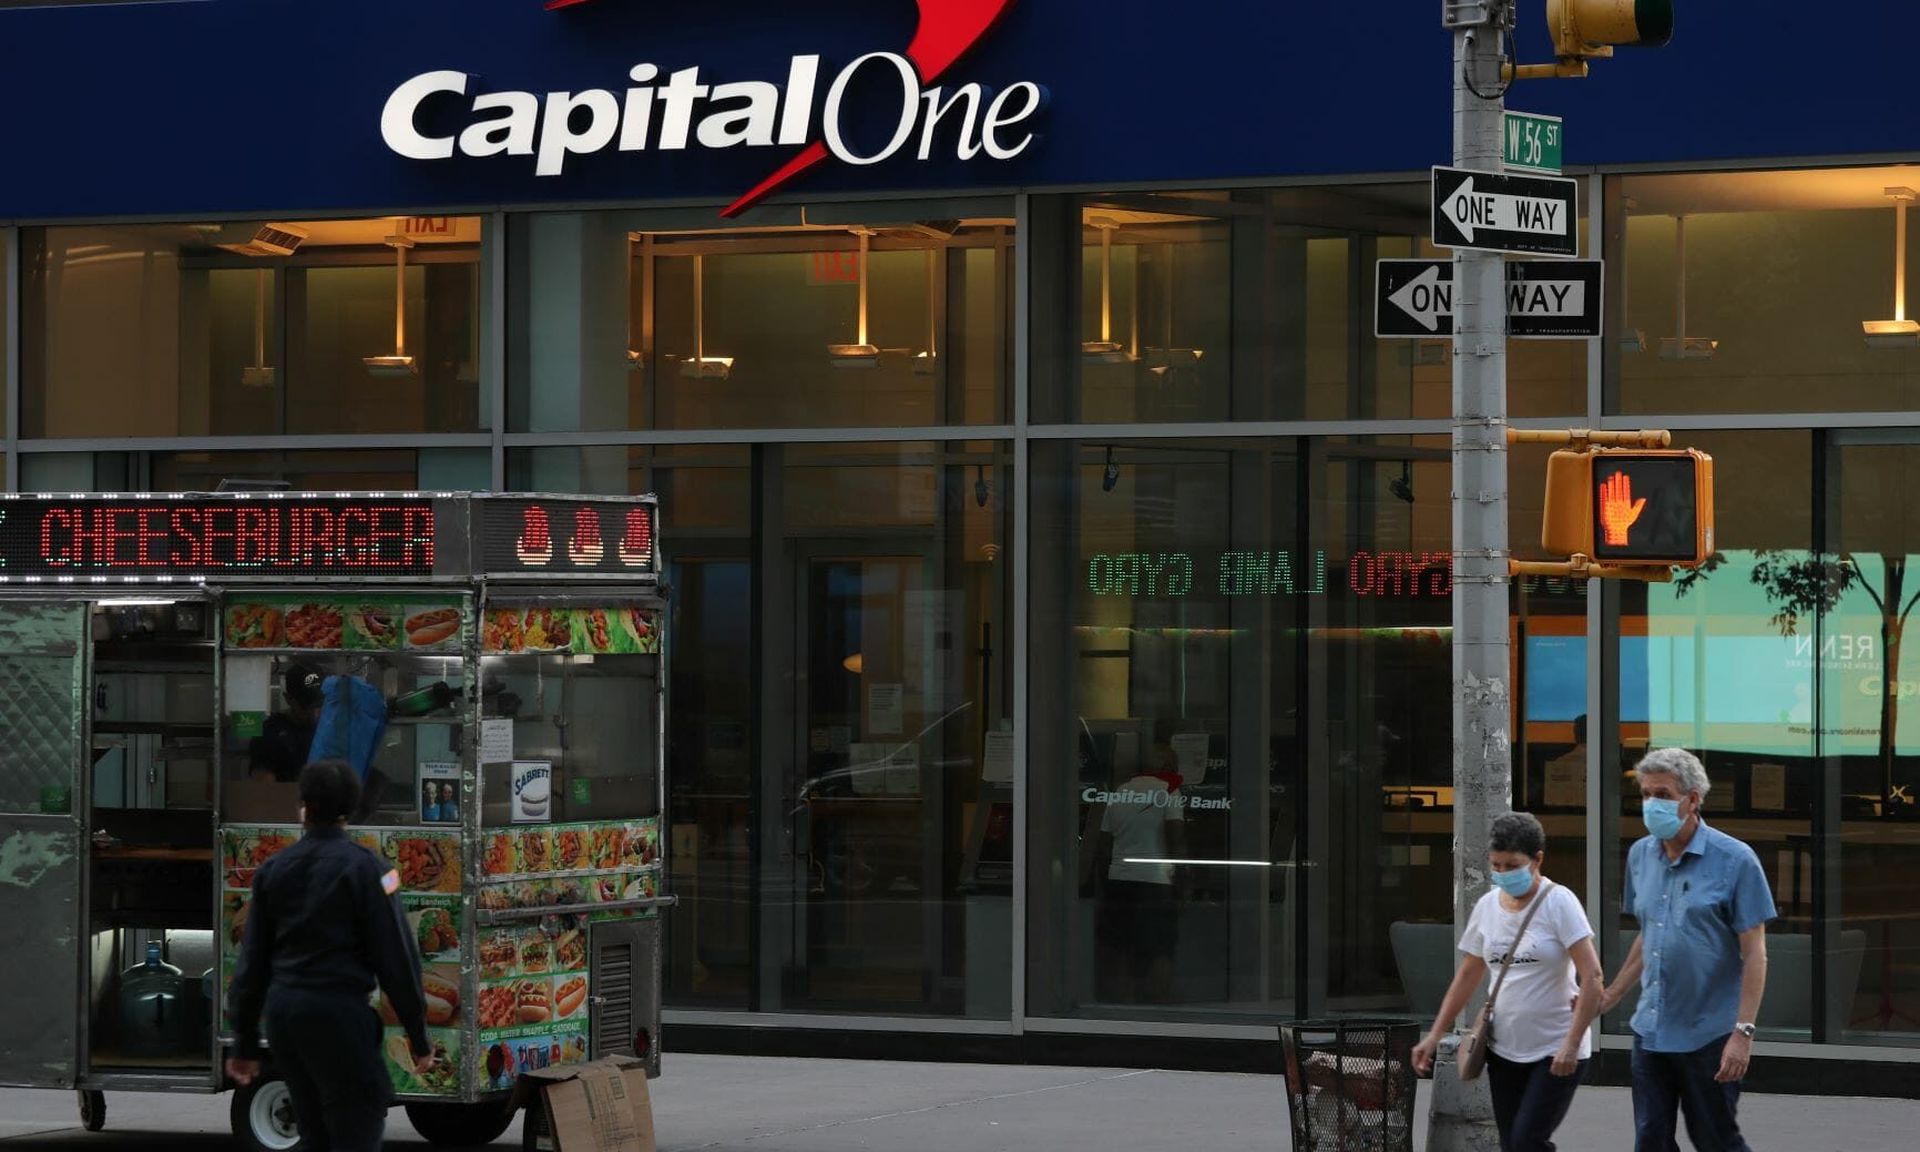 People walk near a Capital One Bank in New York City. The financial firm received a hefty fine from the OCC and a cease and desist order from the Federal Reserve after a massive breach exposed data on 100 million customers. (Photo: Rob Kim/Getty Images)